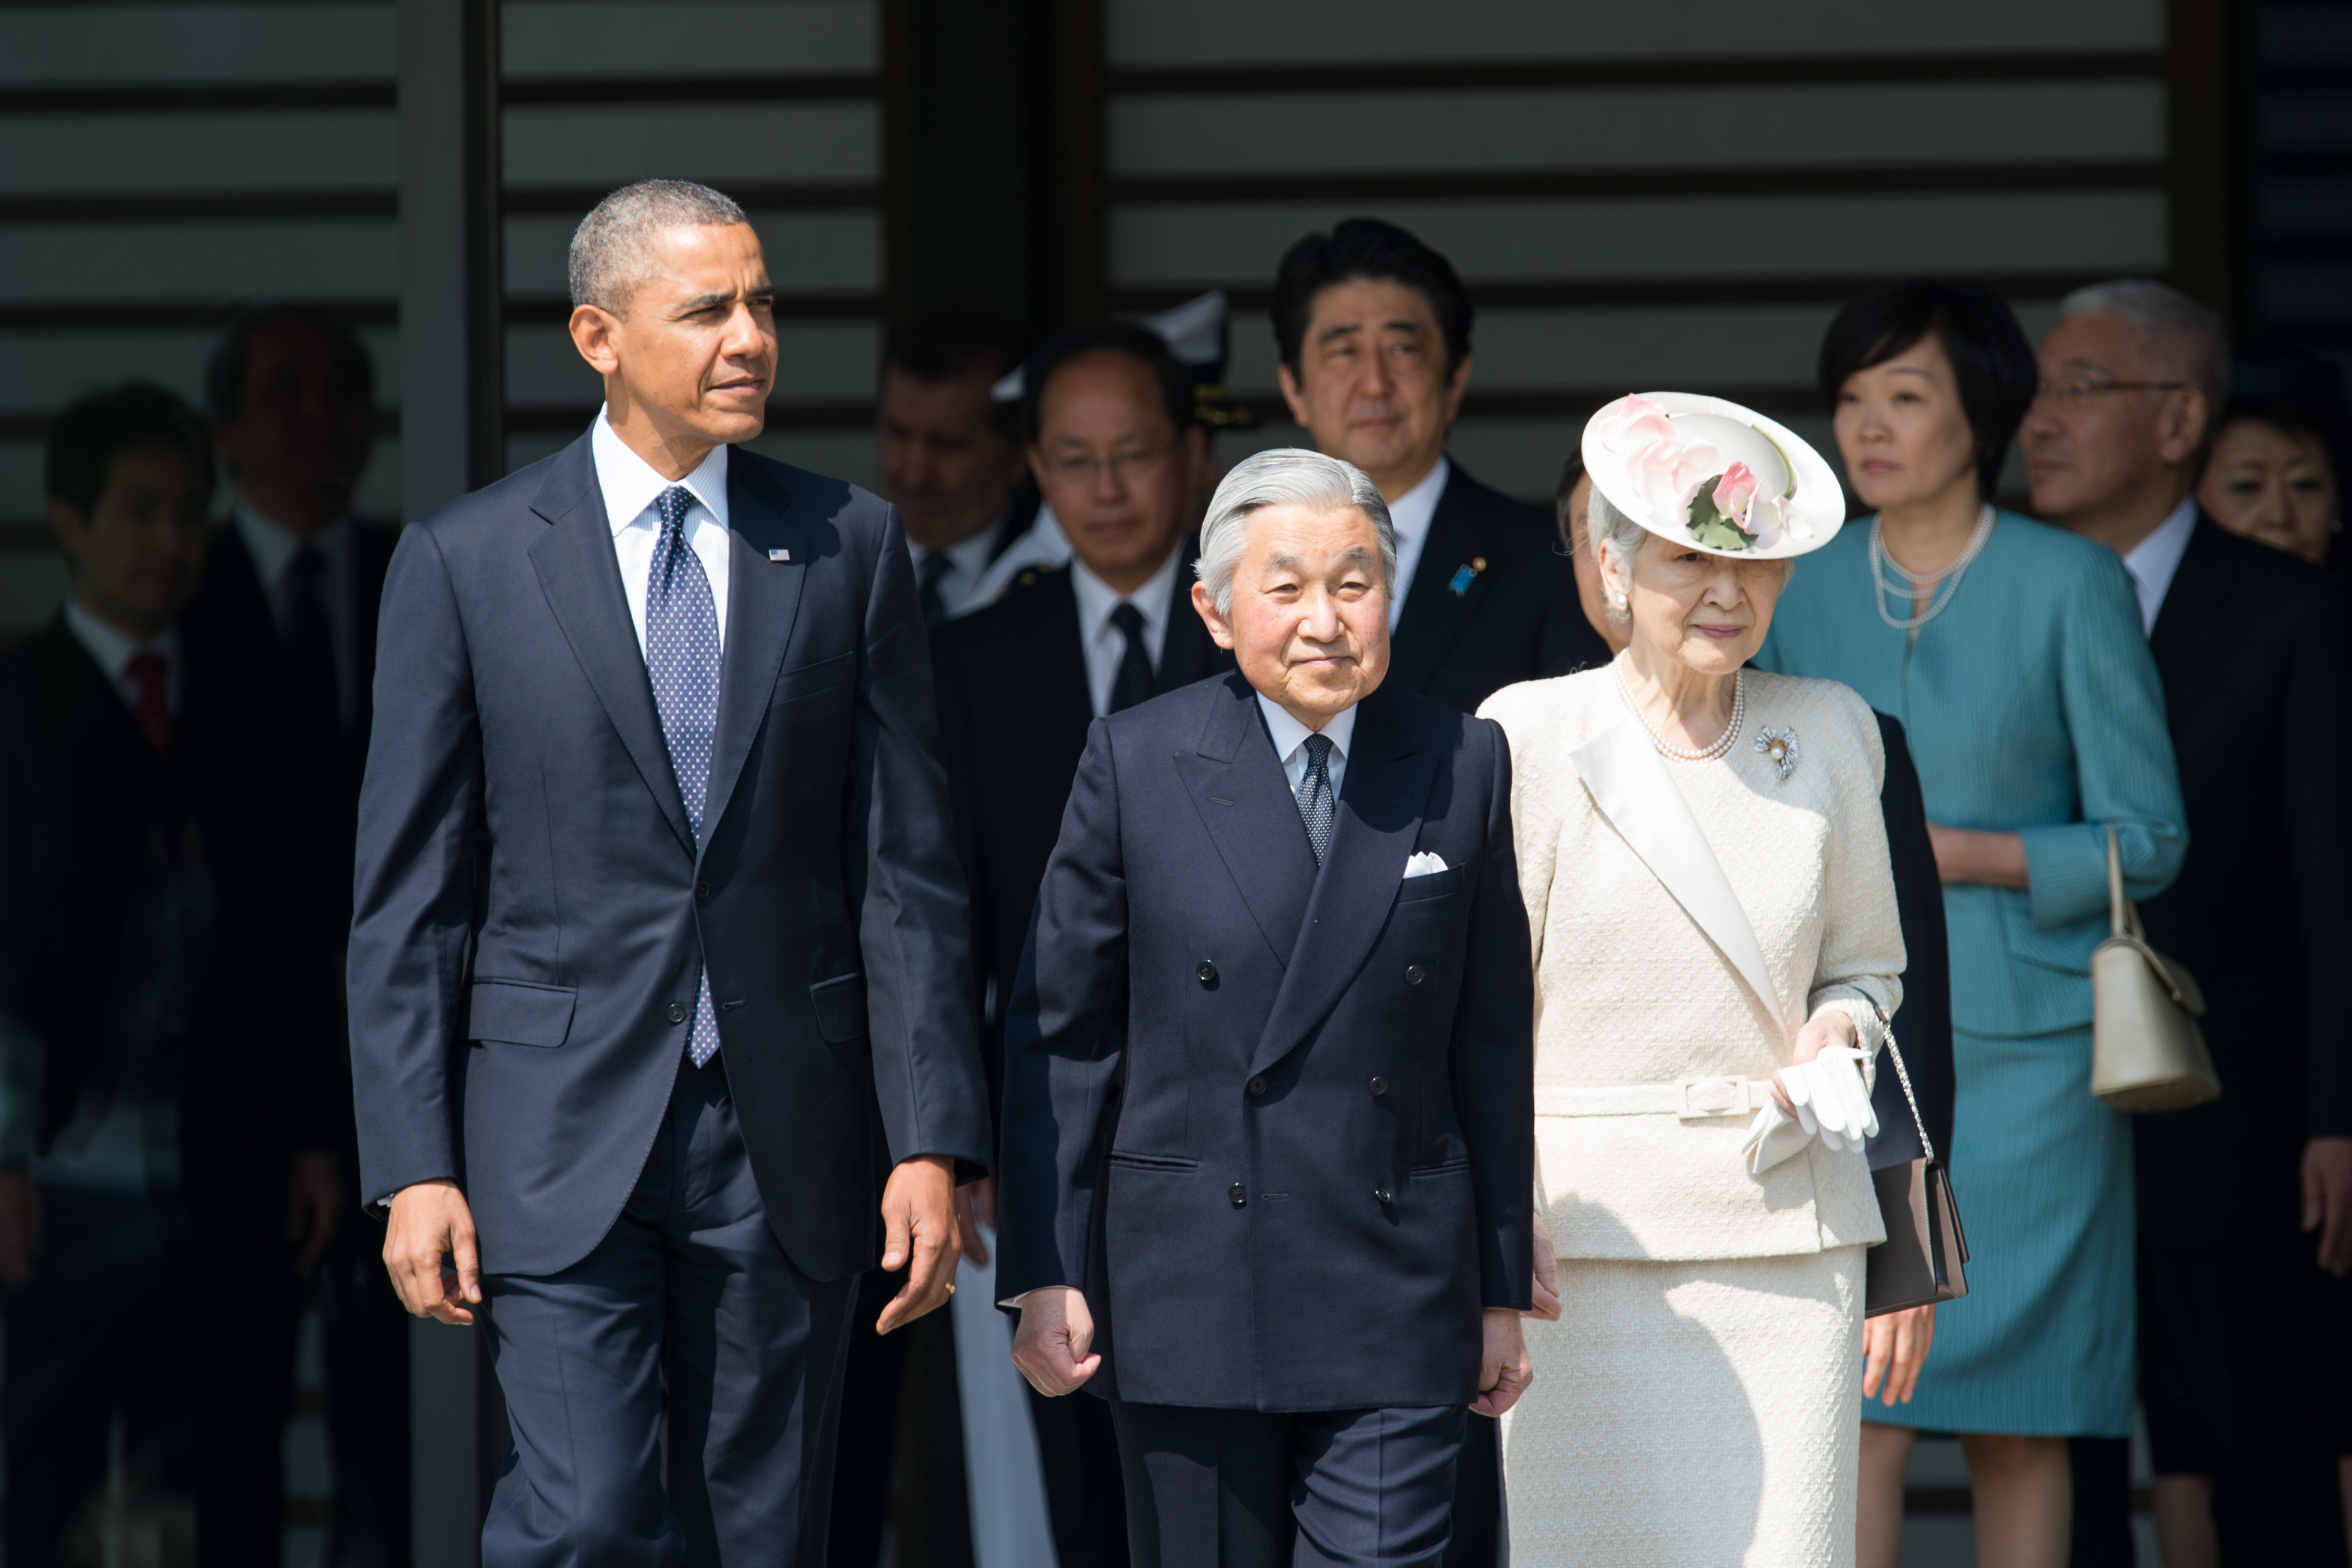  U.S. President Barack Obama participates in the welcome ceremony with their Majesties the Emperor and Empress of Japan and Japan’s Prime Minister Shinzo Abe at the Imperial Palace during his state visit to Japan in 2014. U.S. State Department Photo